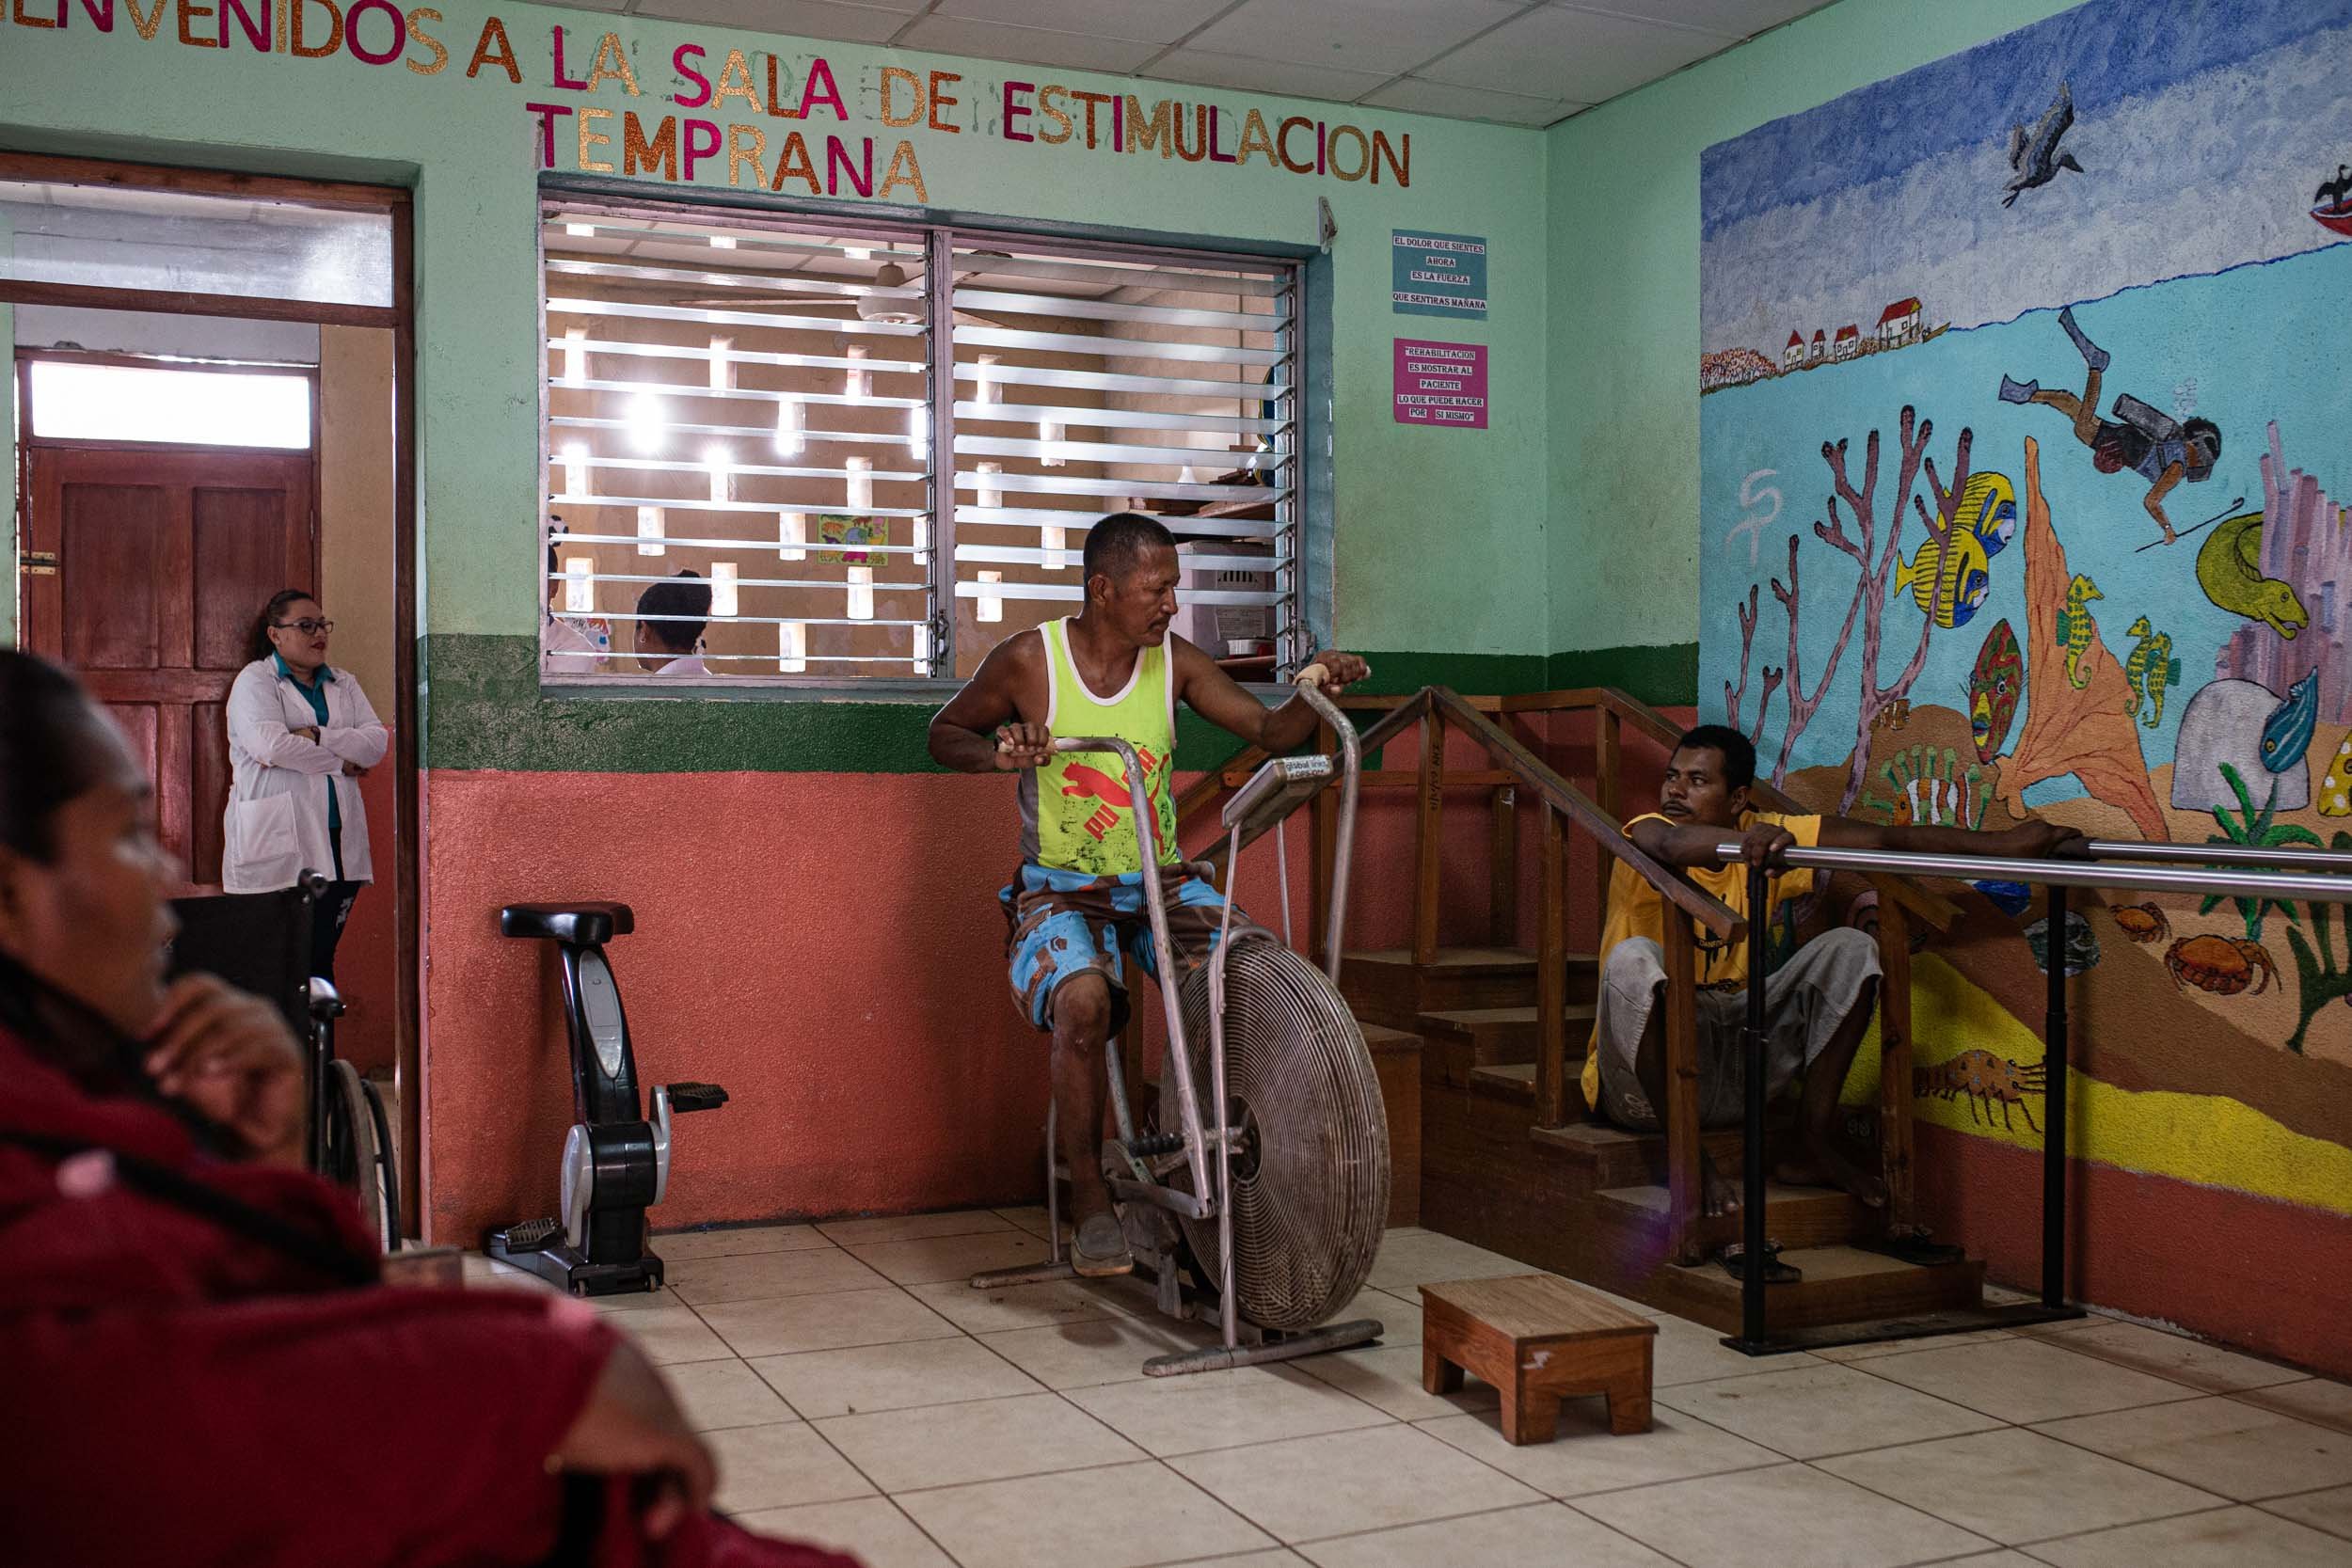  Physiotherapy at a health clinic in Puerto Cabezas. Andres Reyes, center, and Marlon Hilario, right, won’t be able to walk again because of decompression sickness, but treatment will help them regain some movement. 